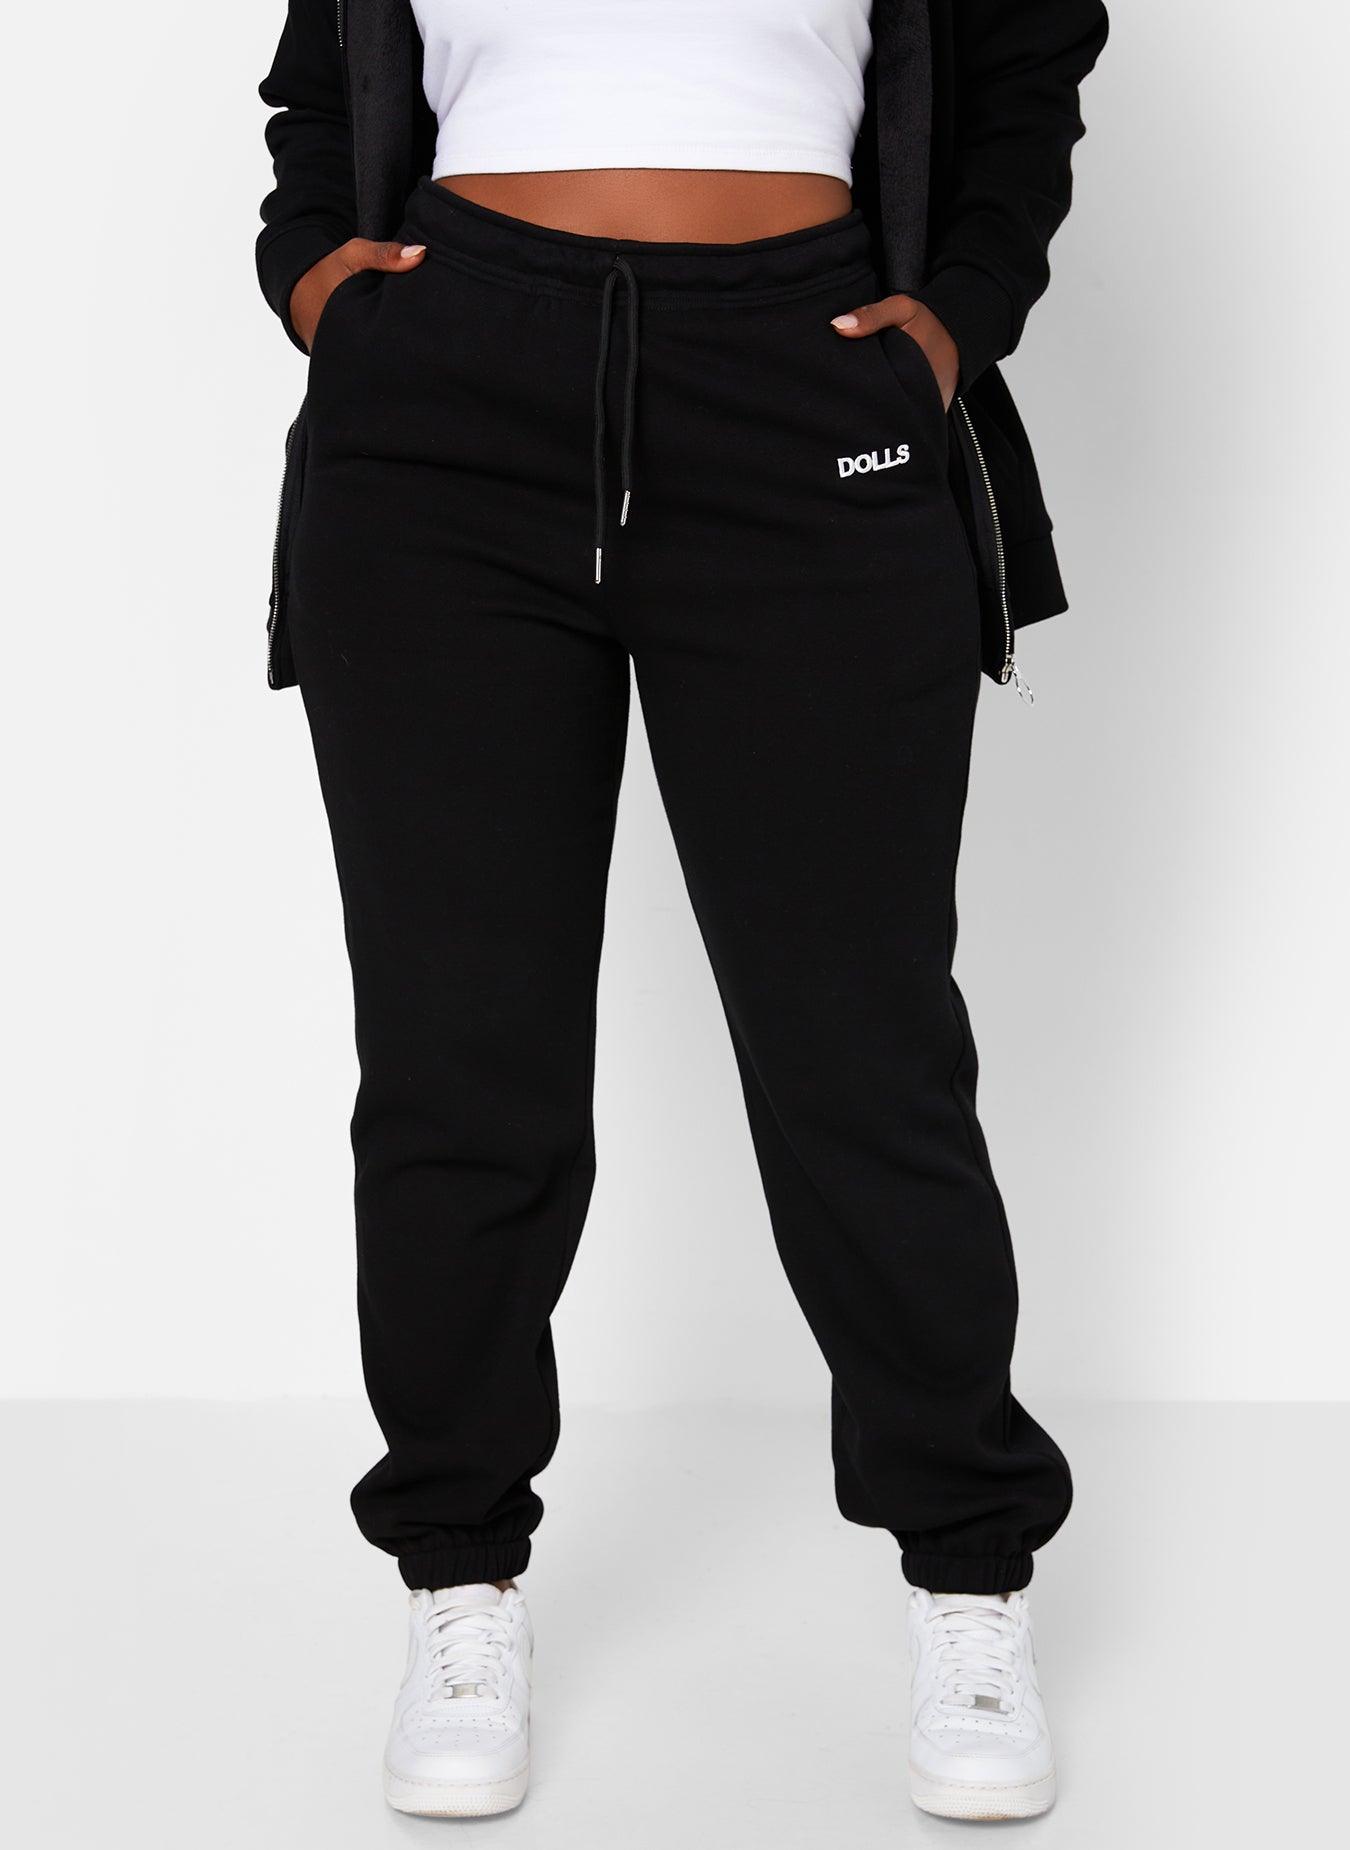 Black Goals Embroidered Drawstring Joggers W. Pockets Plus Sizes